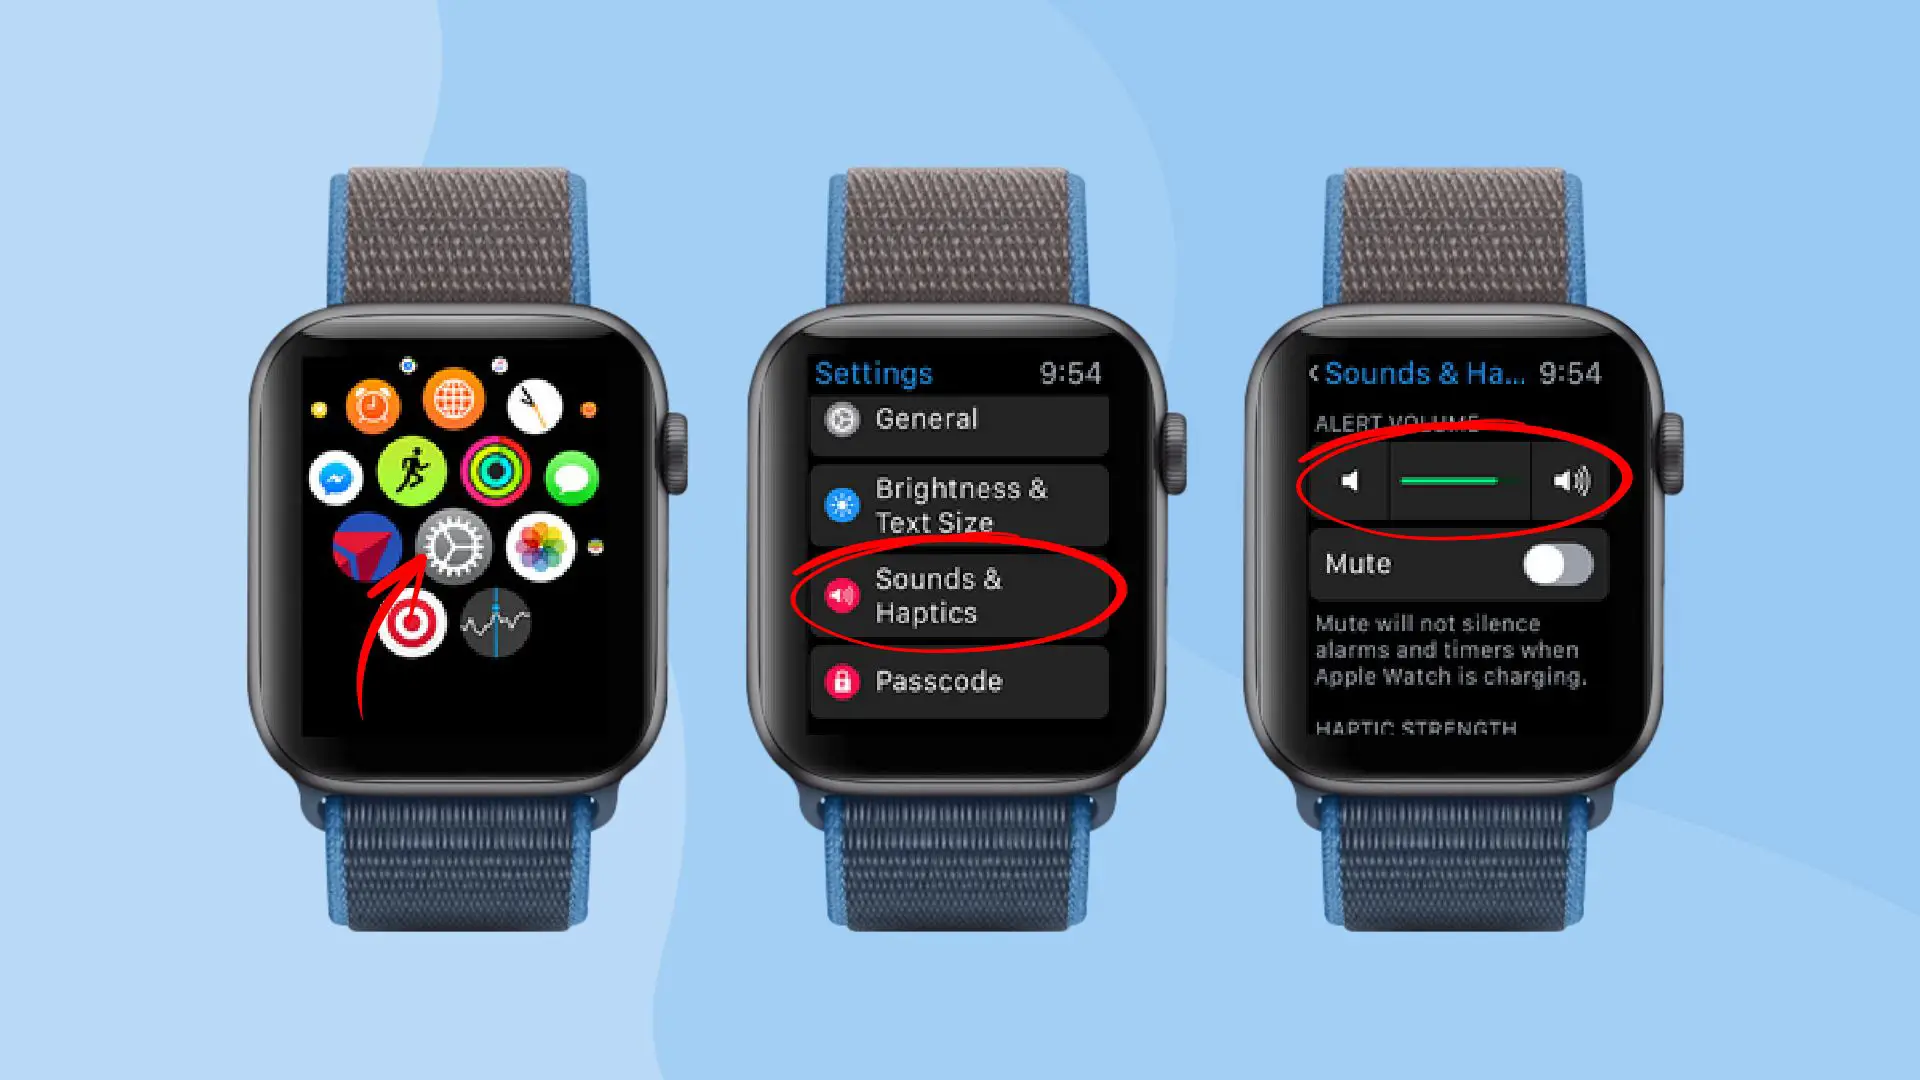 how to turn volume up on Apple Watch